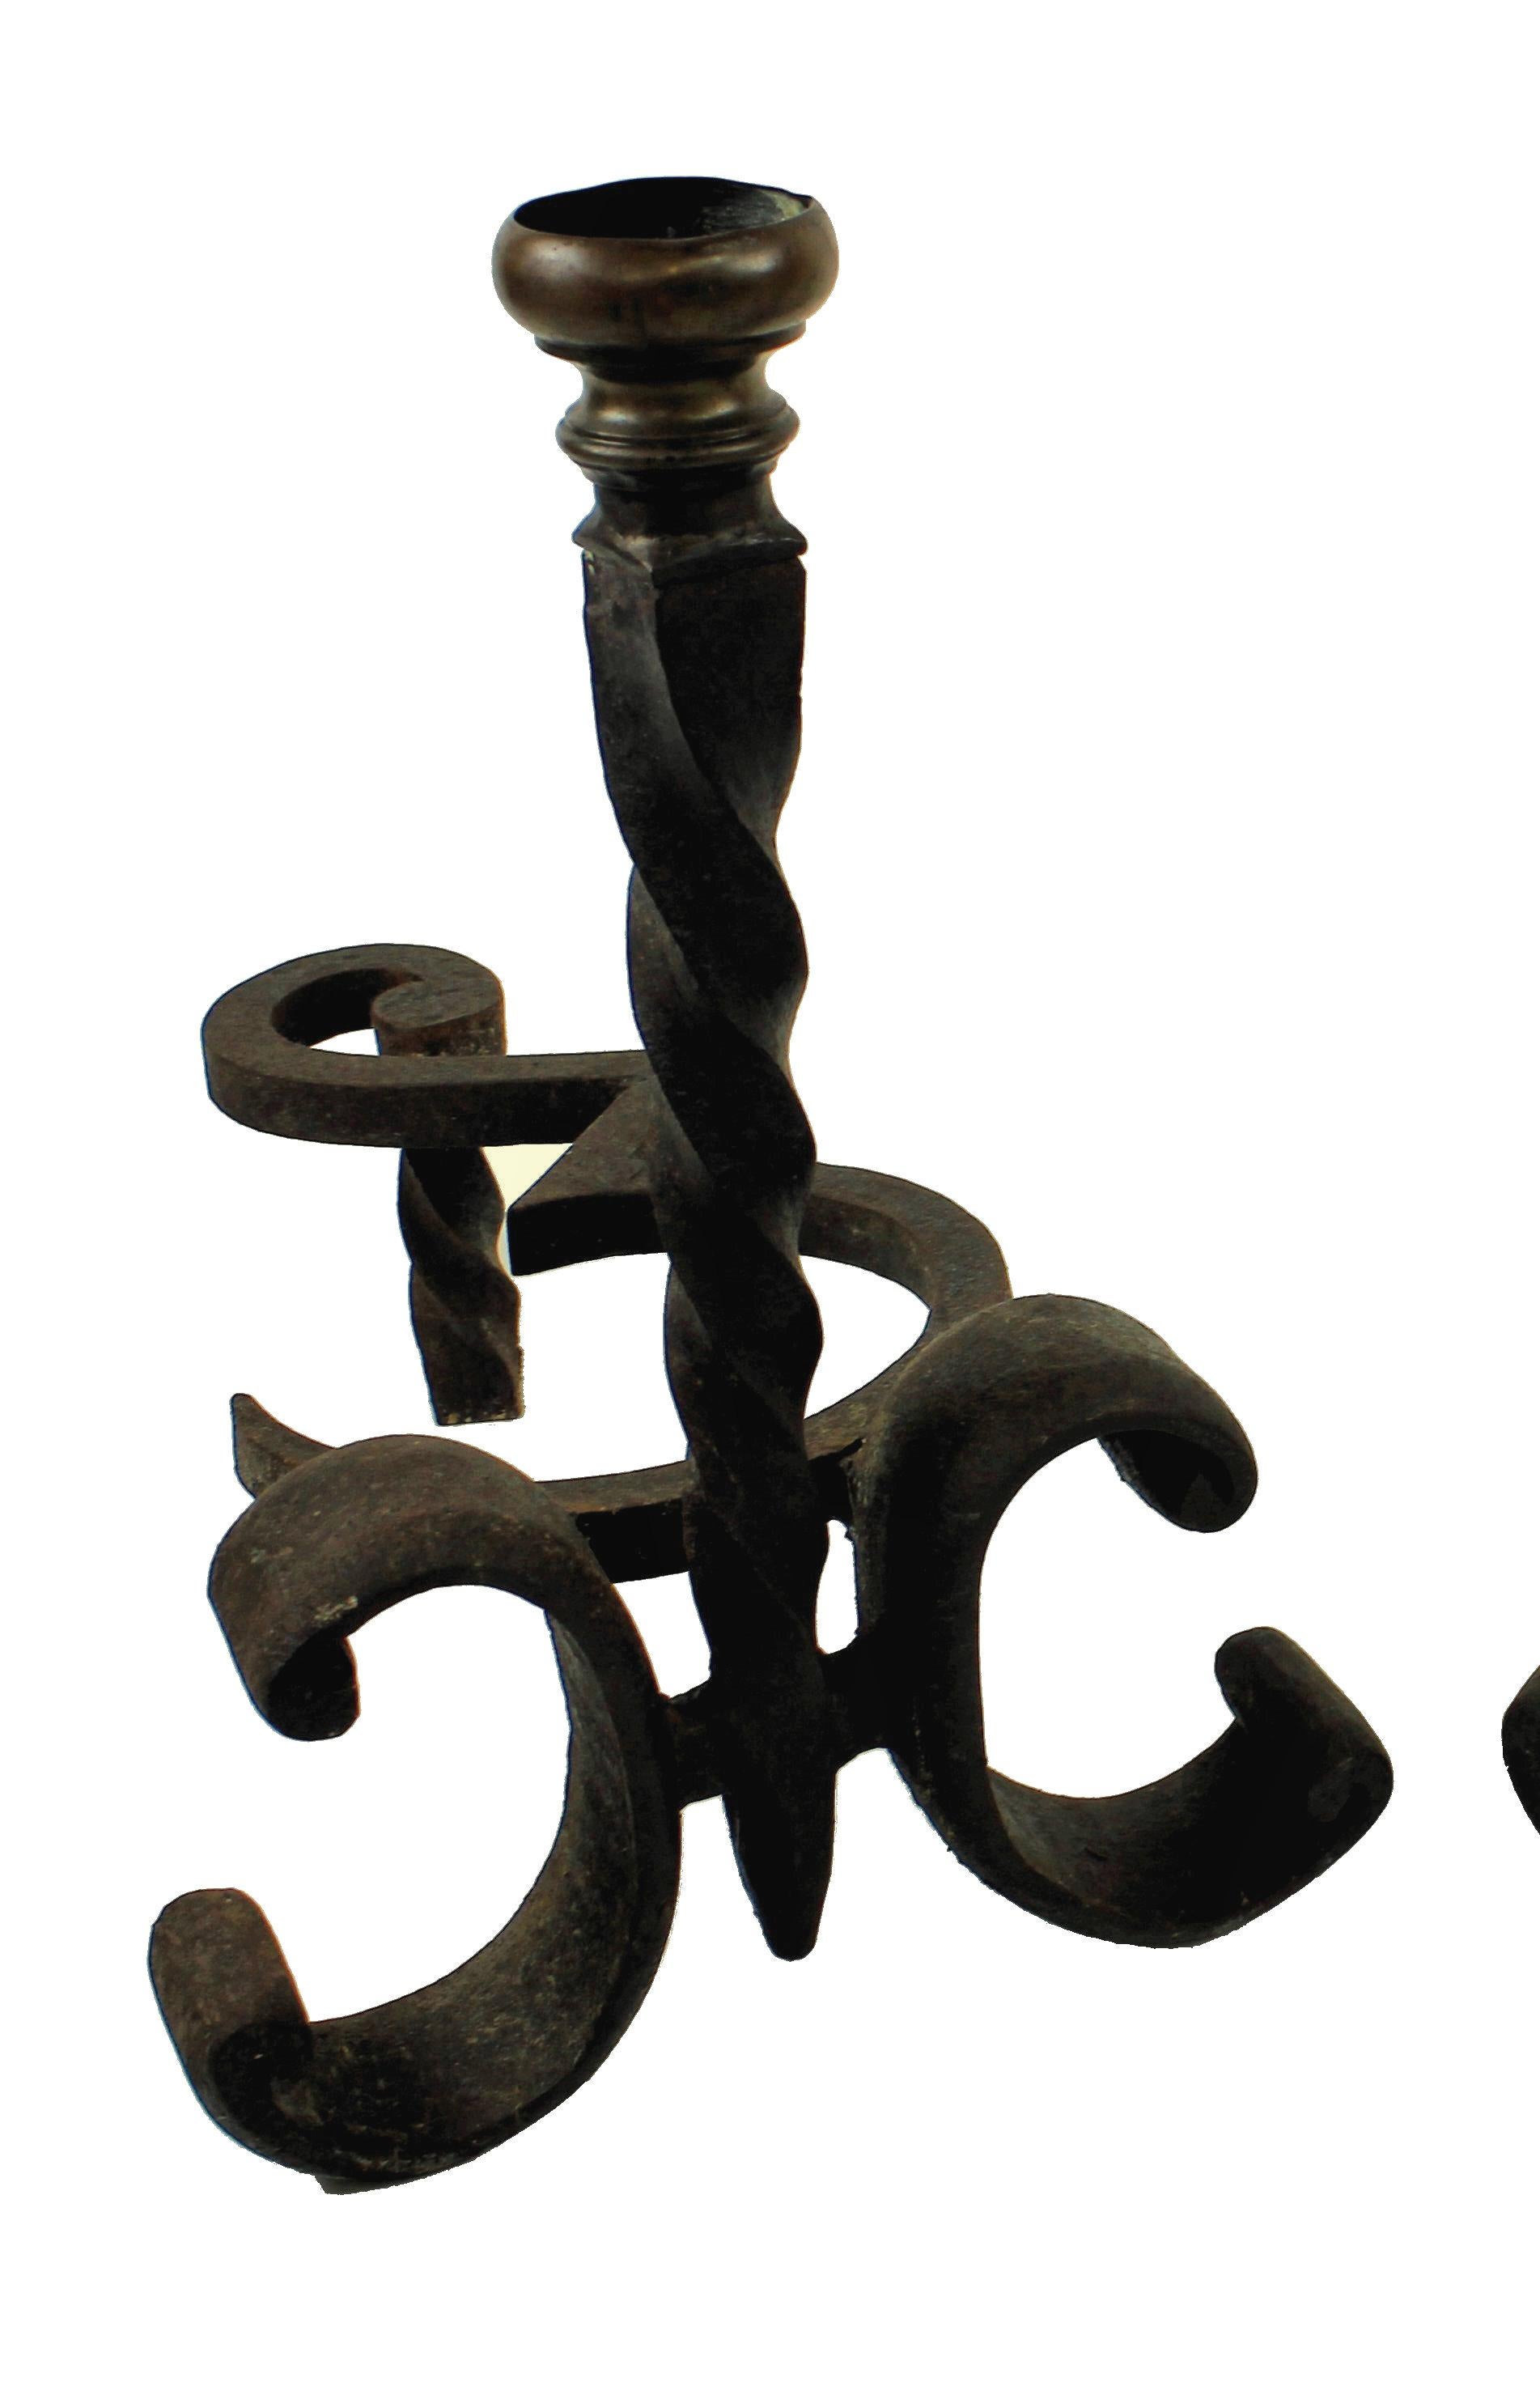 A pair of French Chenet (fire dogs) in wrought iron with a brass finial.